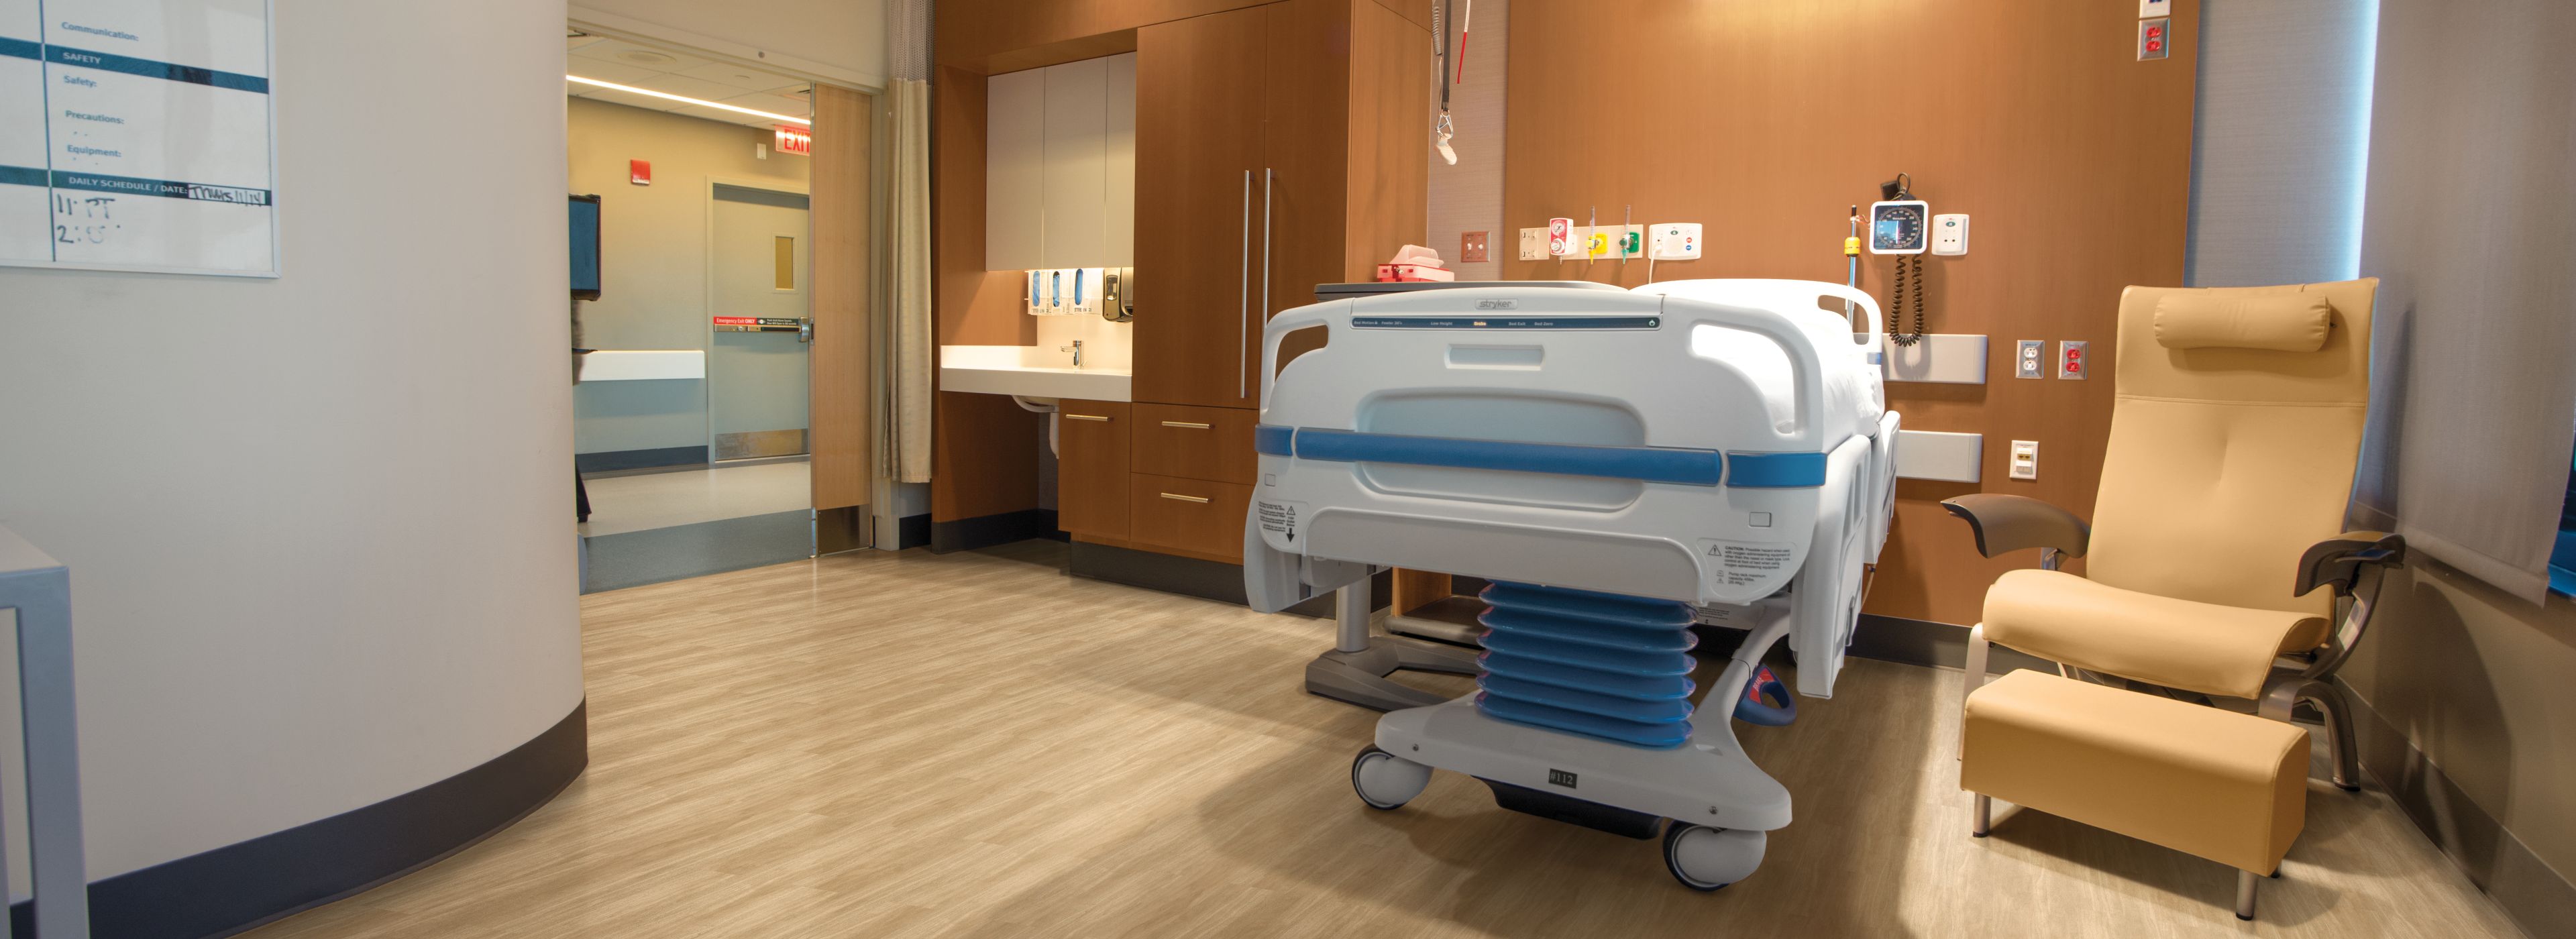 Interface Criterion Classic Woodgrains LVT in patient room with hospital bed and chair image number 1